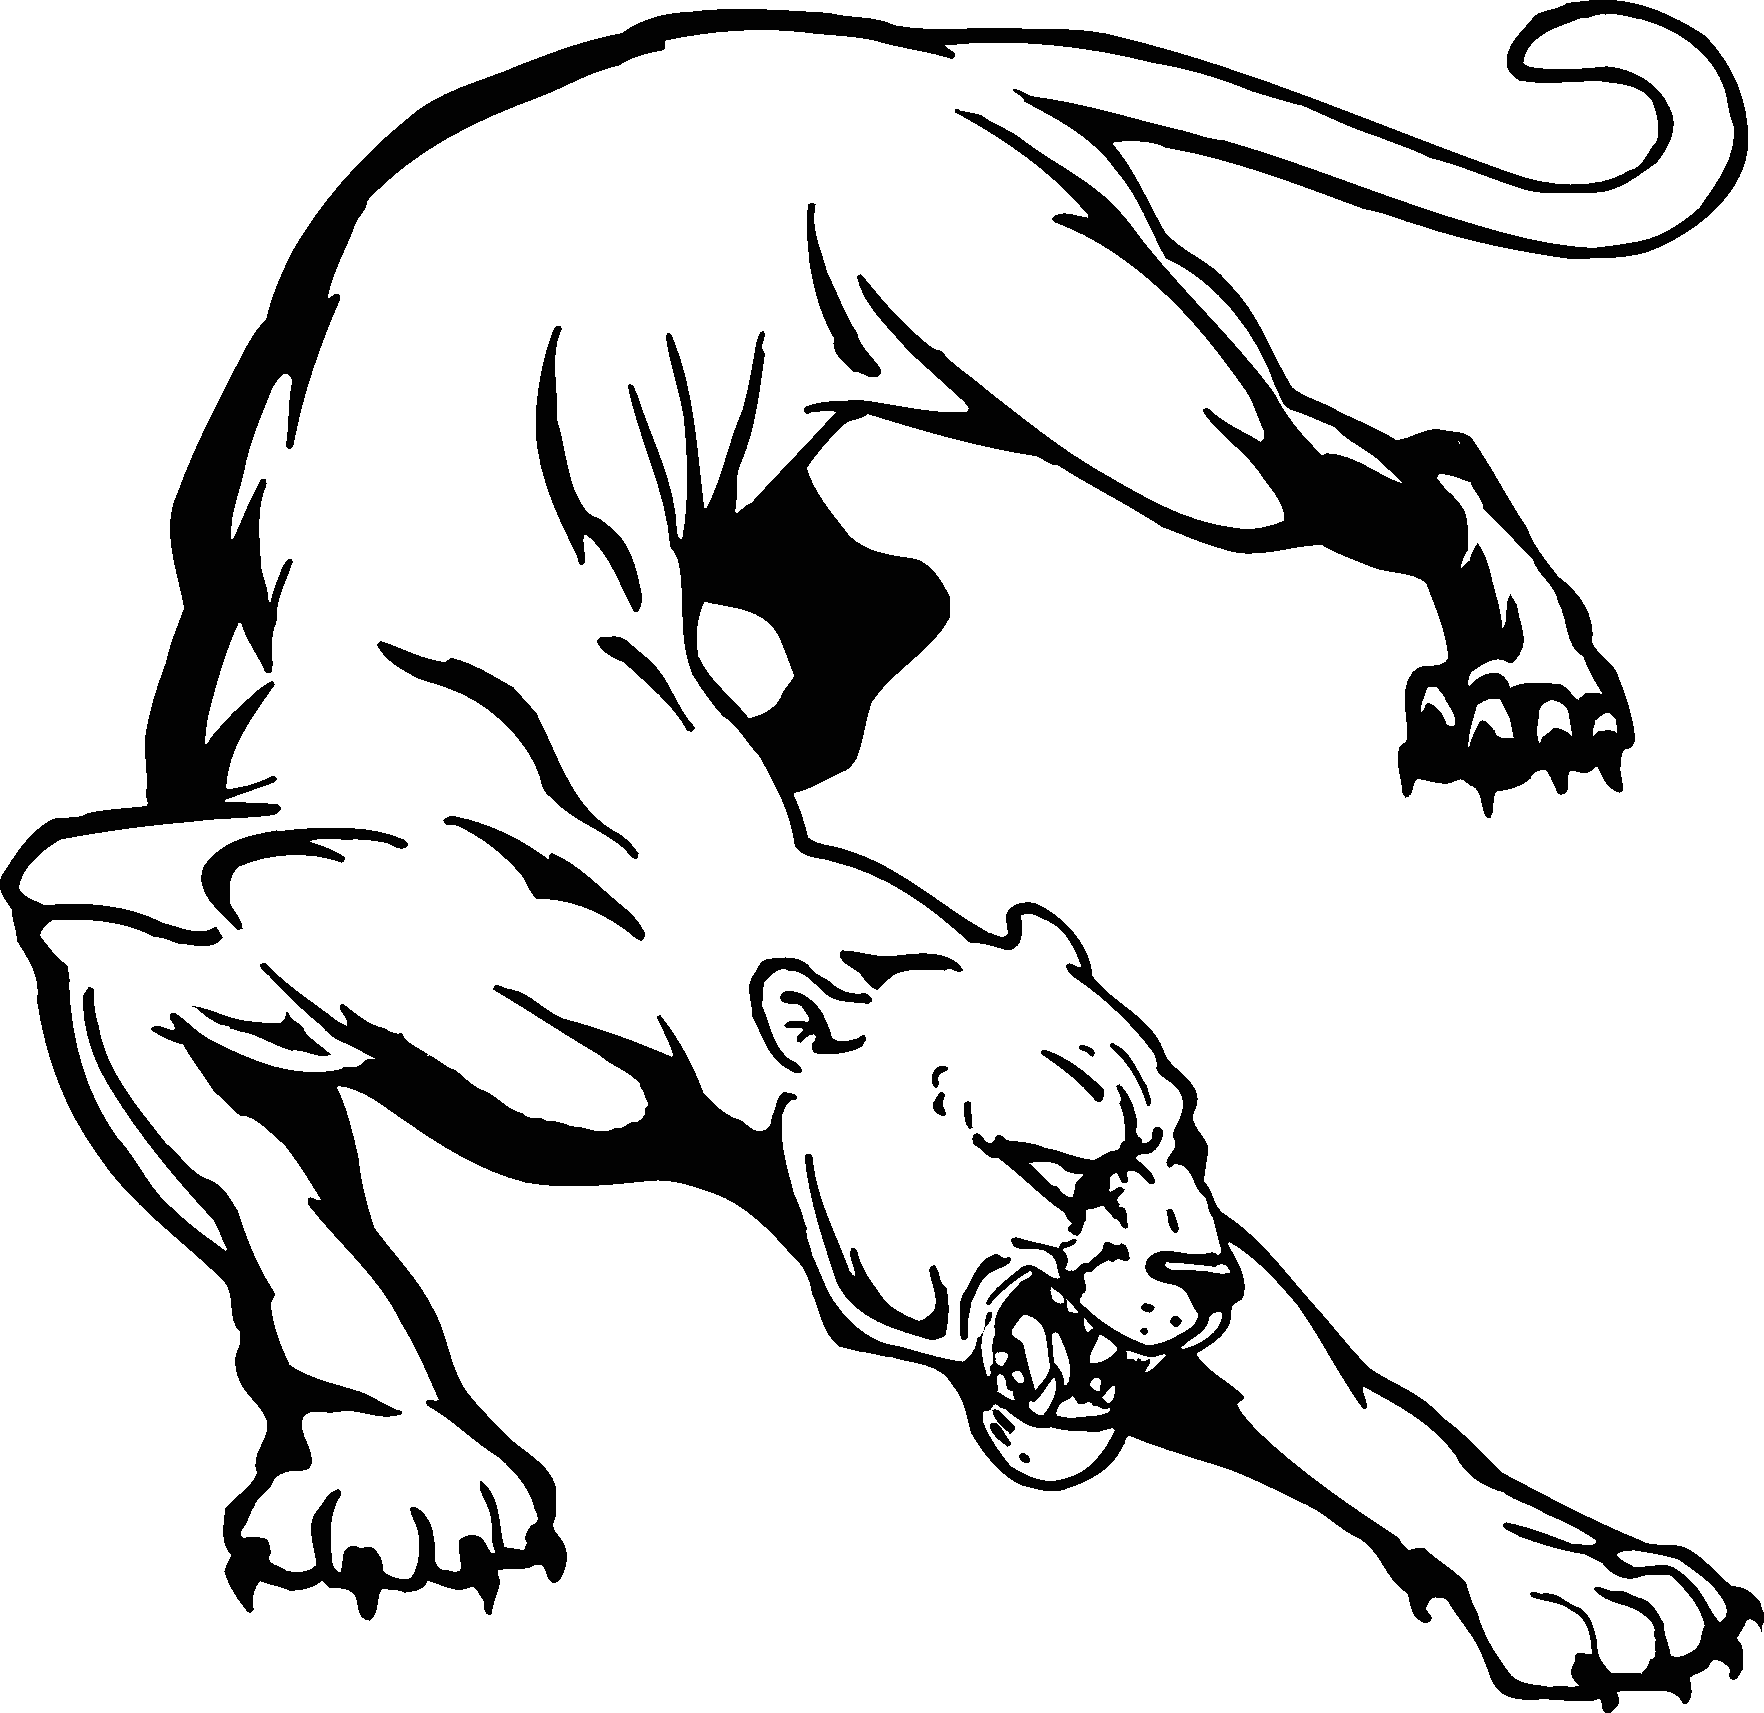 Panther Clip Art Mascots | Clipart library - Free Clipart Images